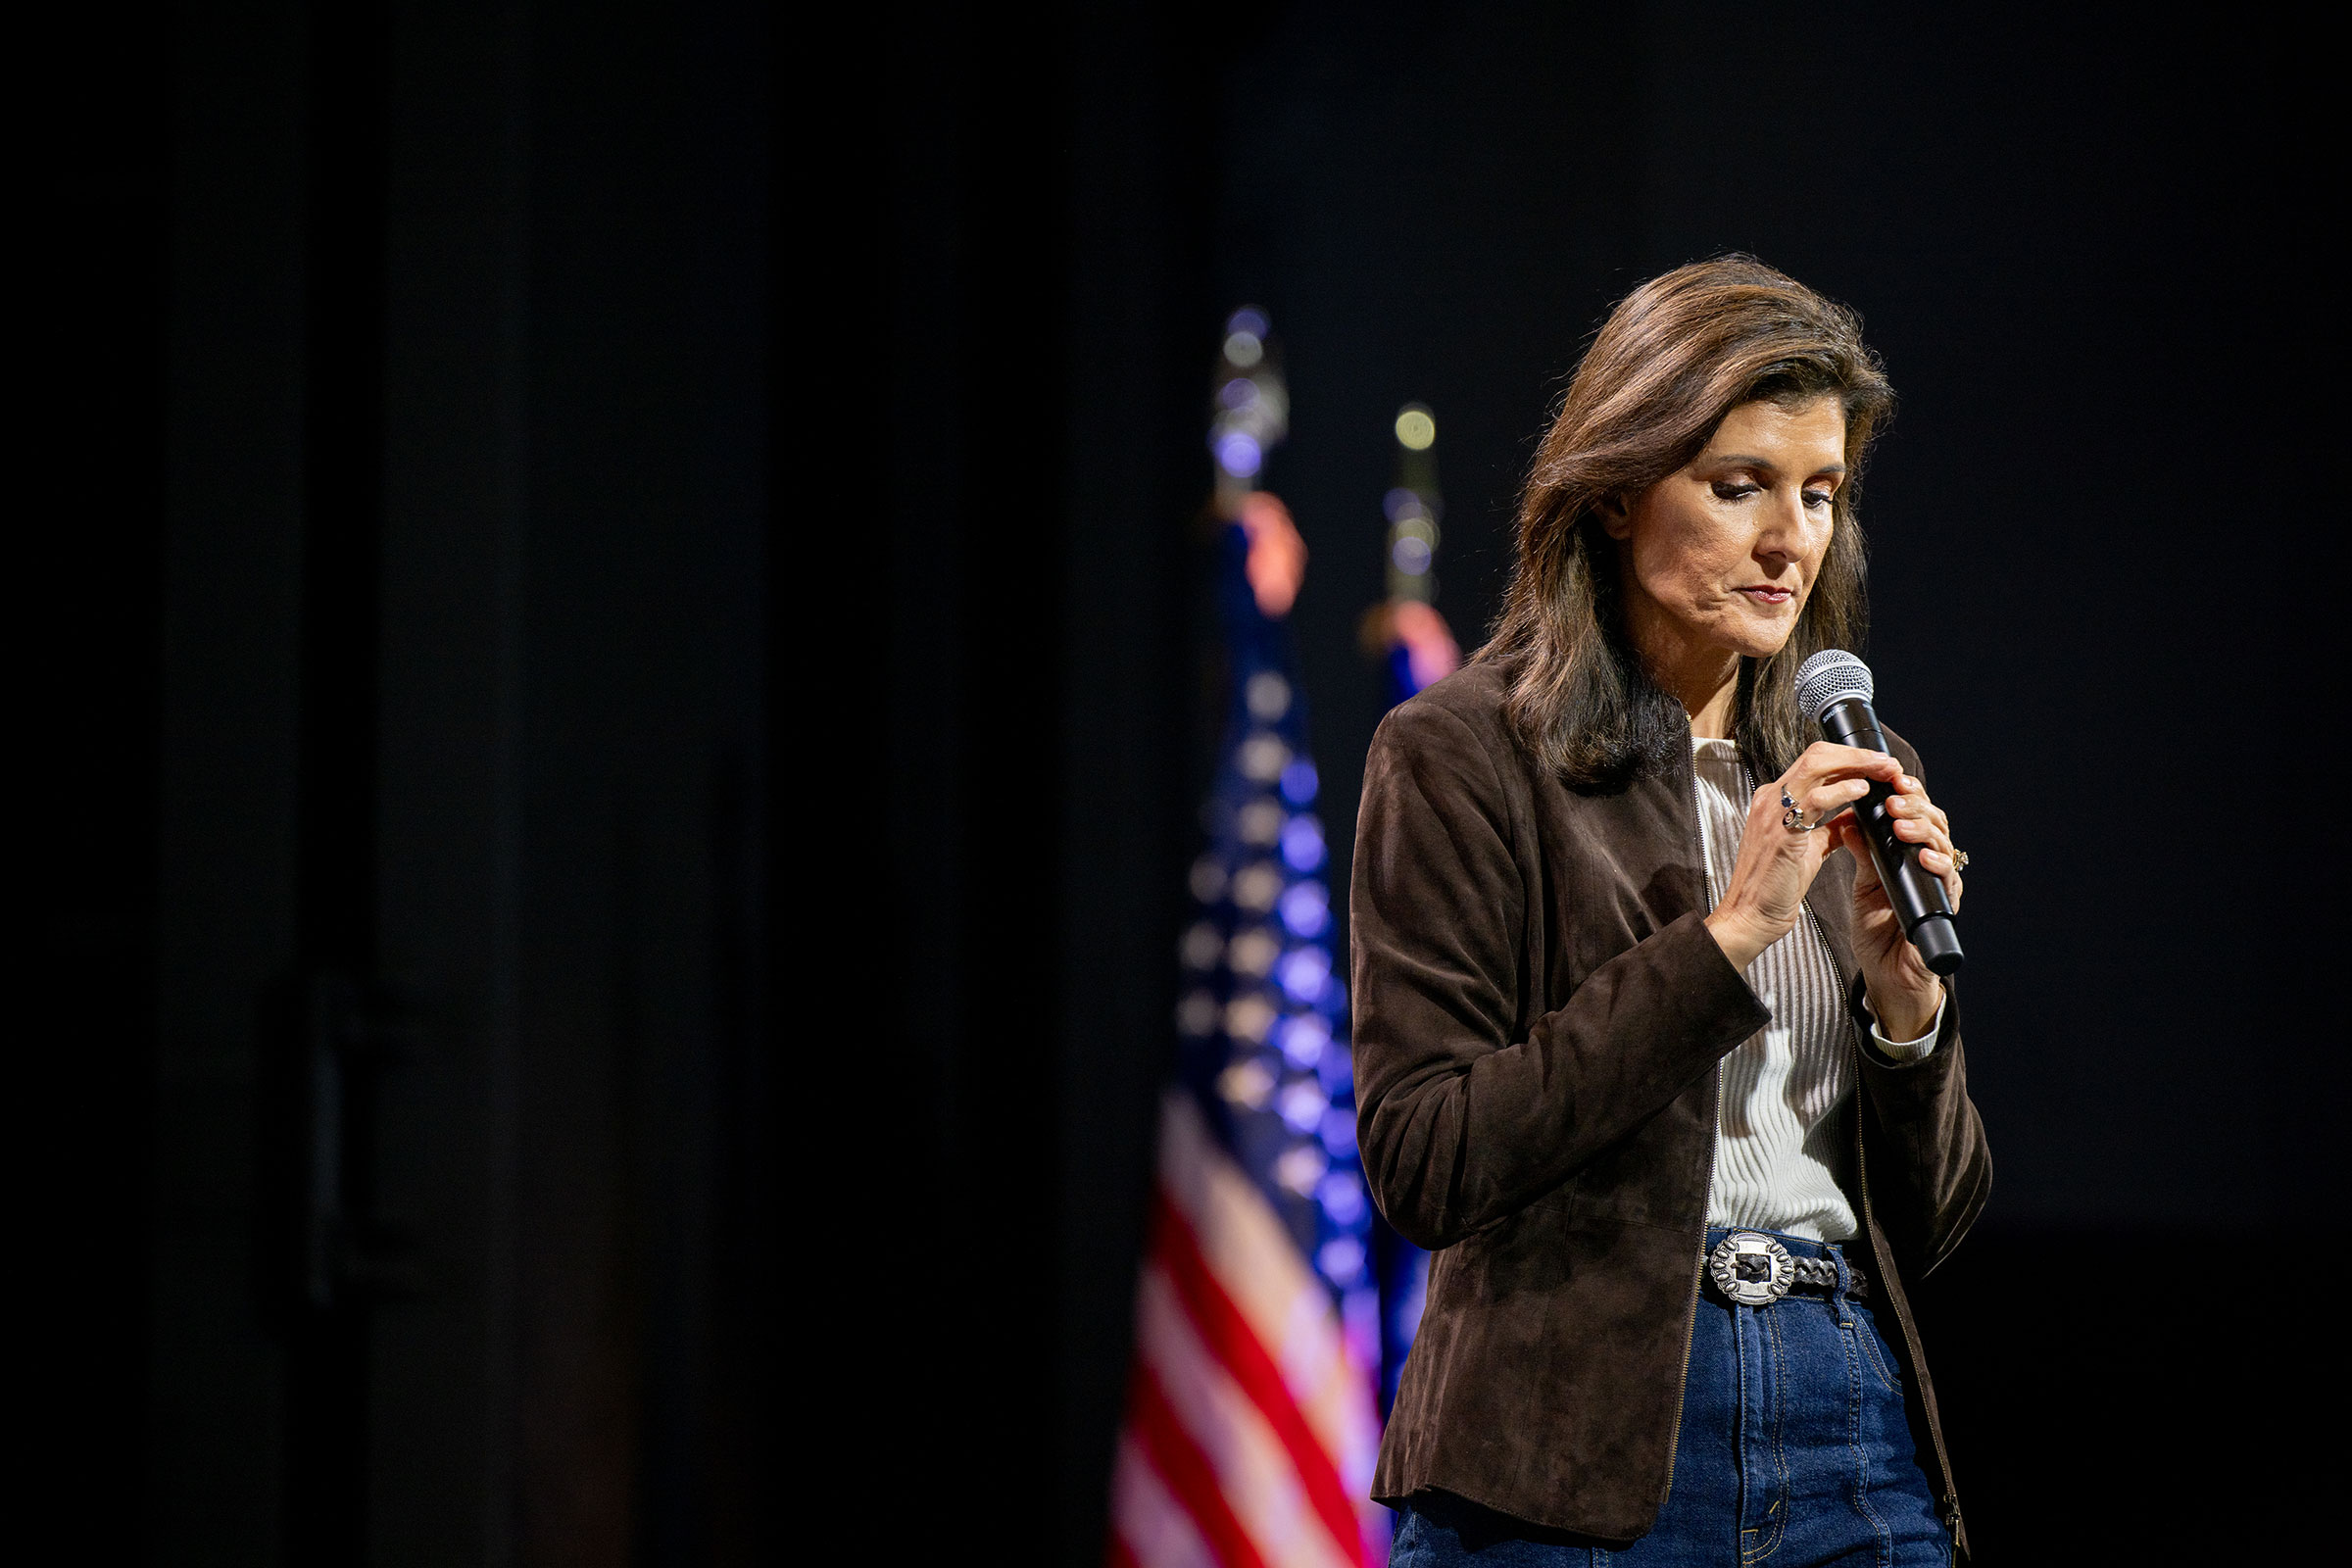 Nikki Haley speaks during a campaign rally at the University of South Carolina - Aiken on February 5, in Aiken, South Carolina.